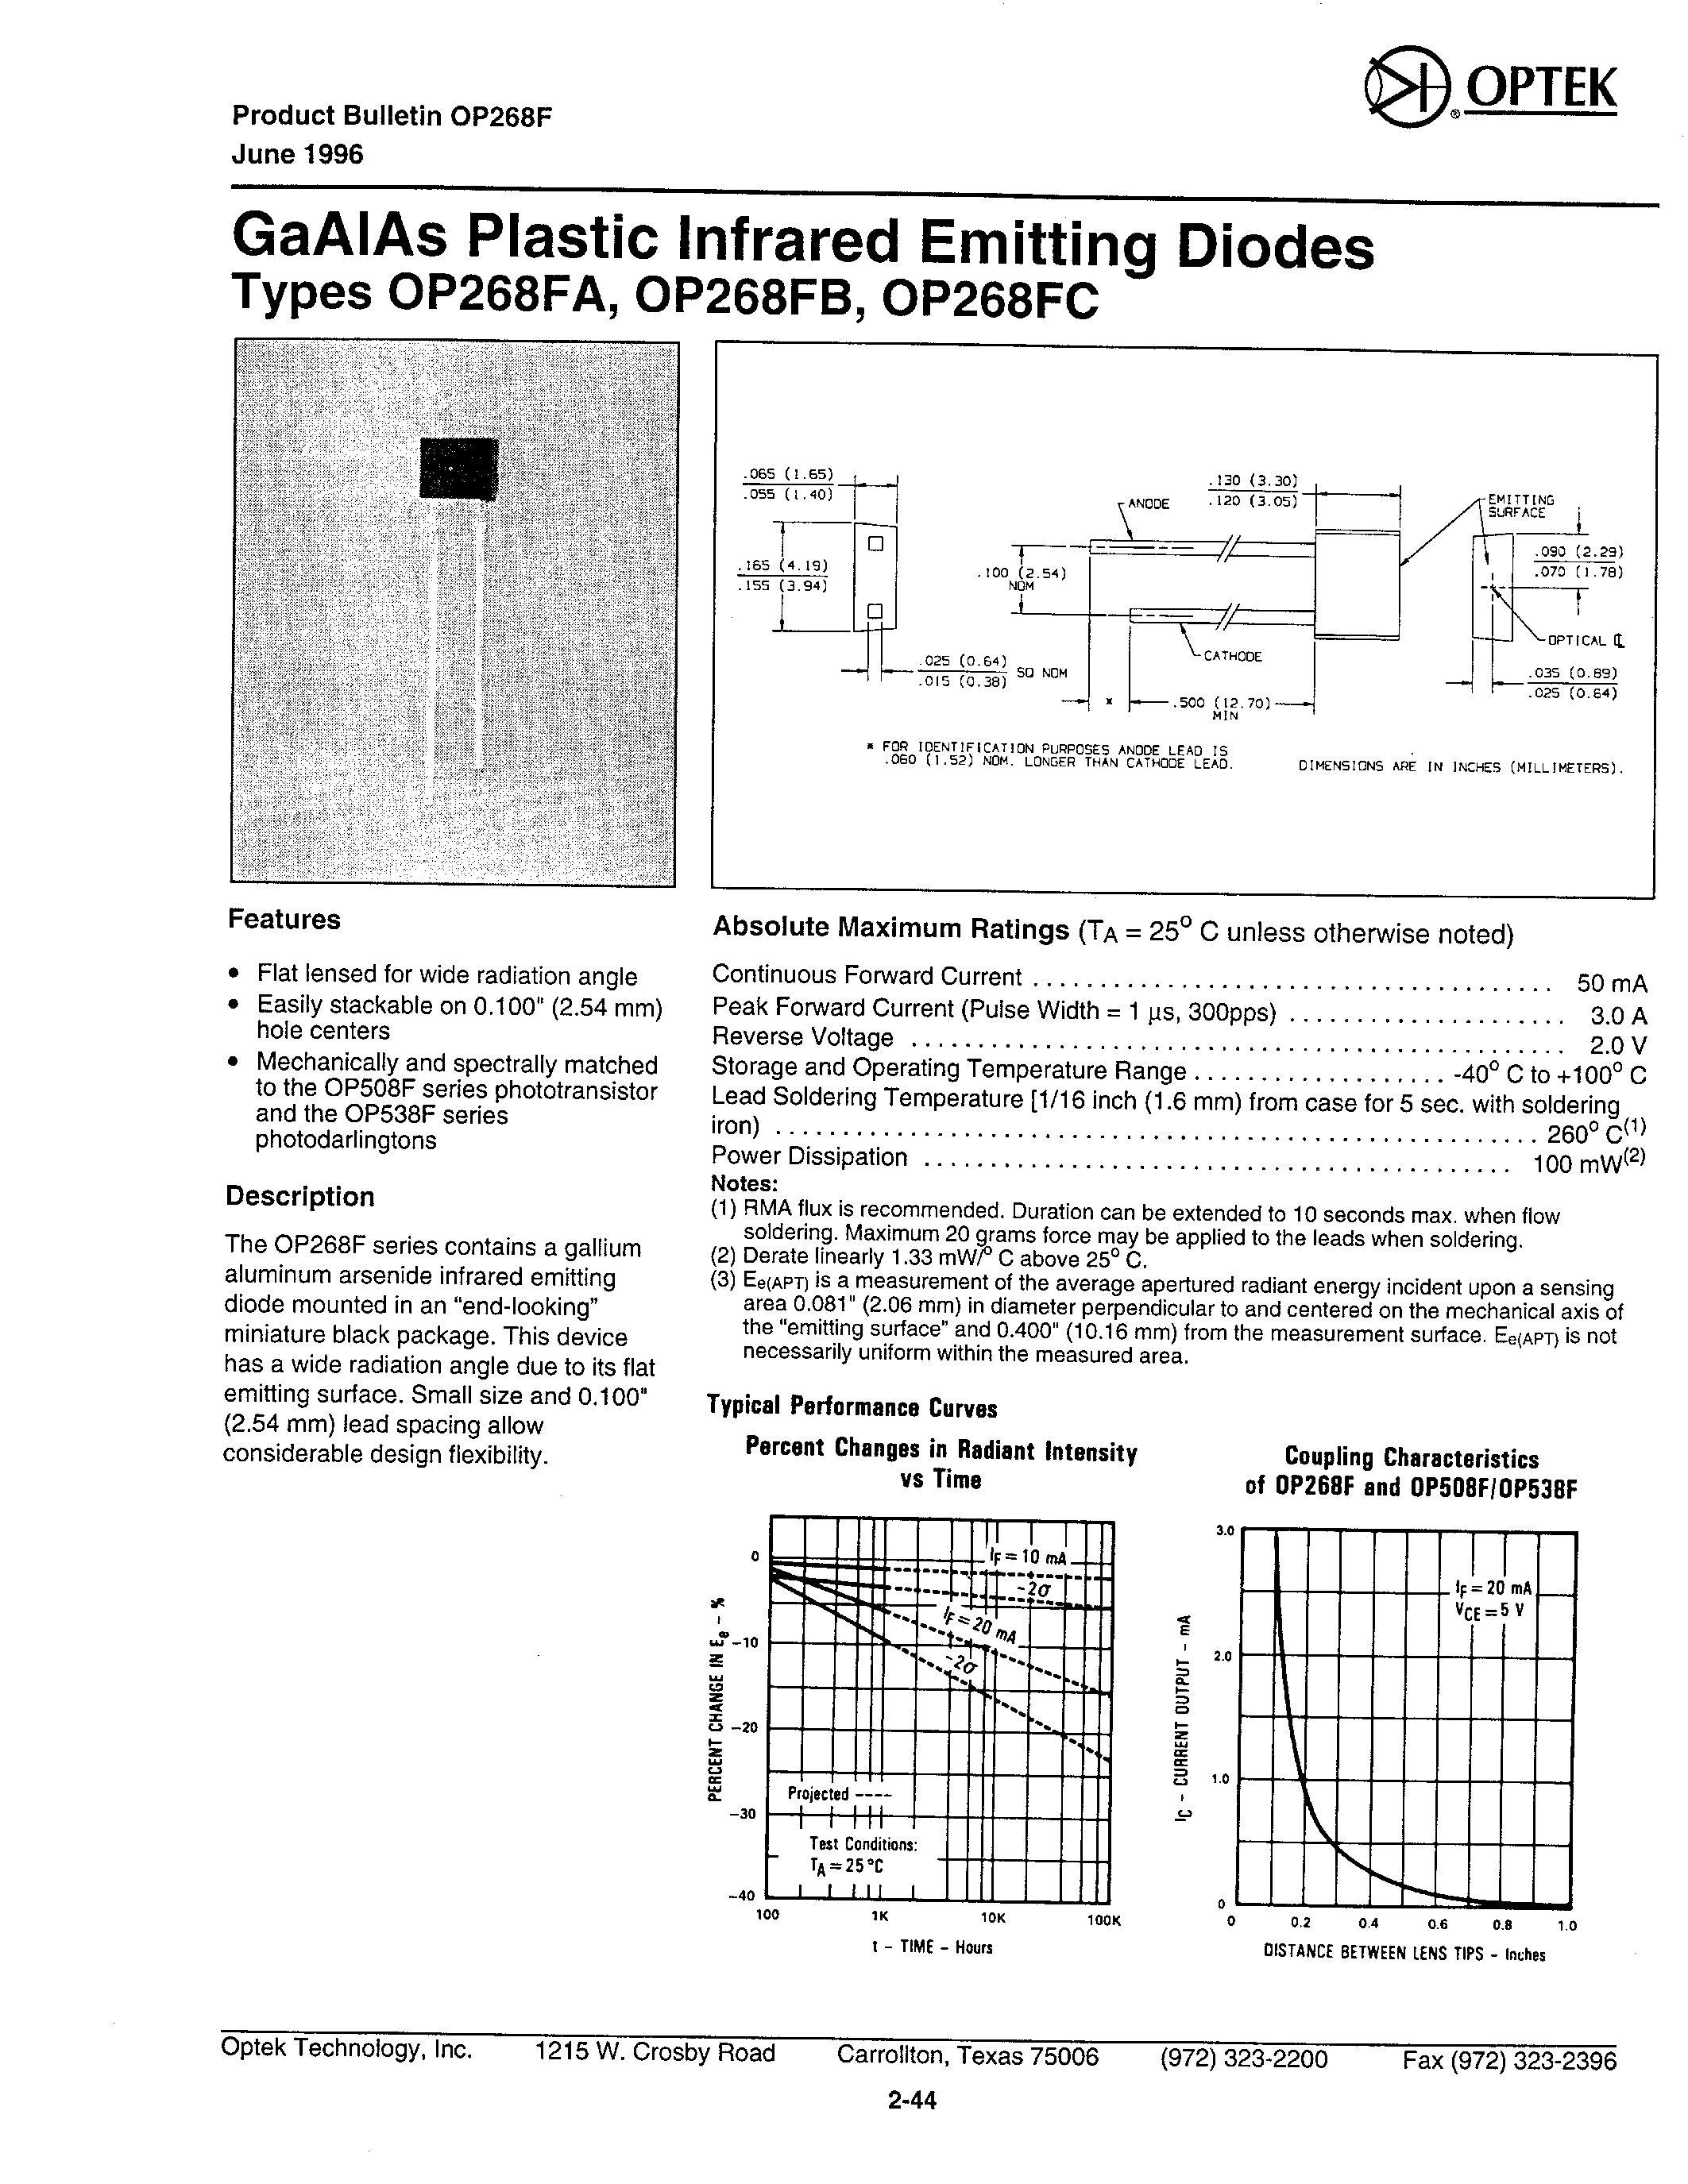 Datasheet OP268FA - (OP268Fx) GaAIAs Plastic Infrared Emitting Diodes page 1